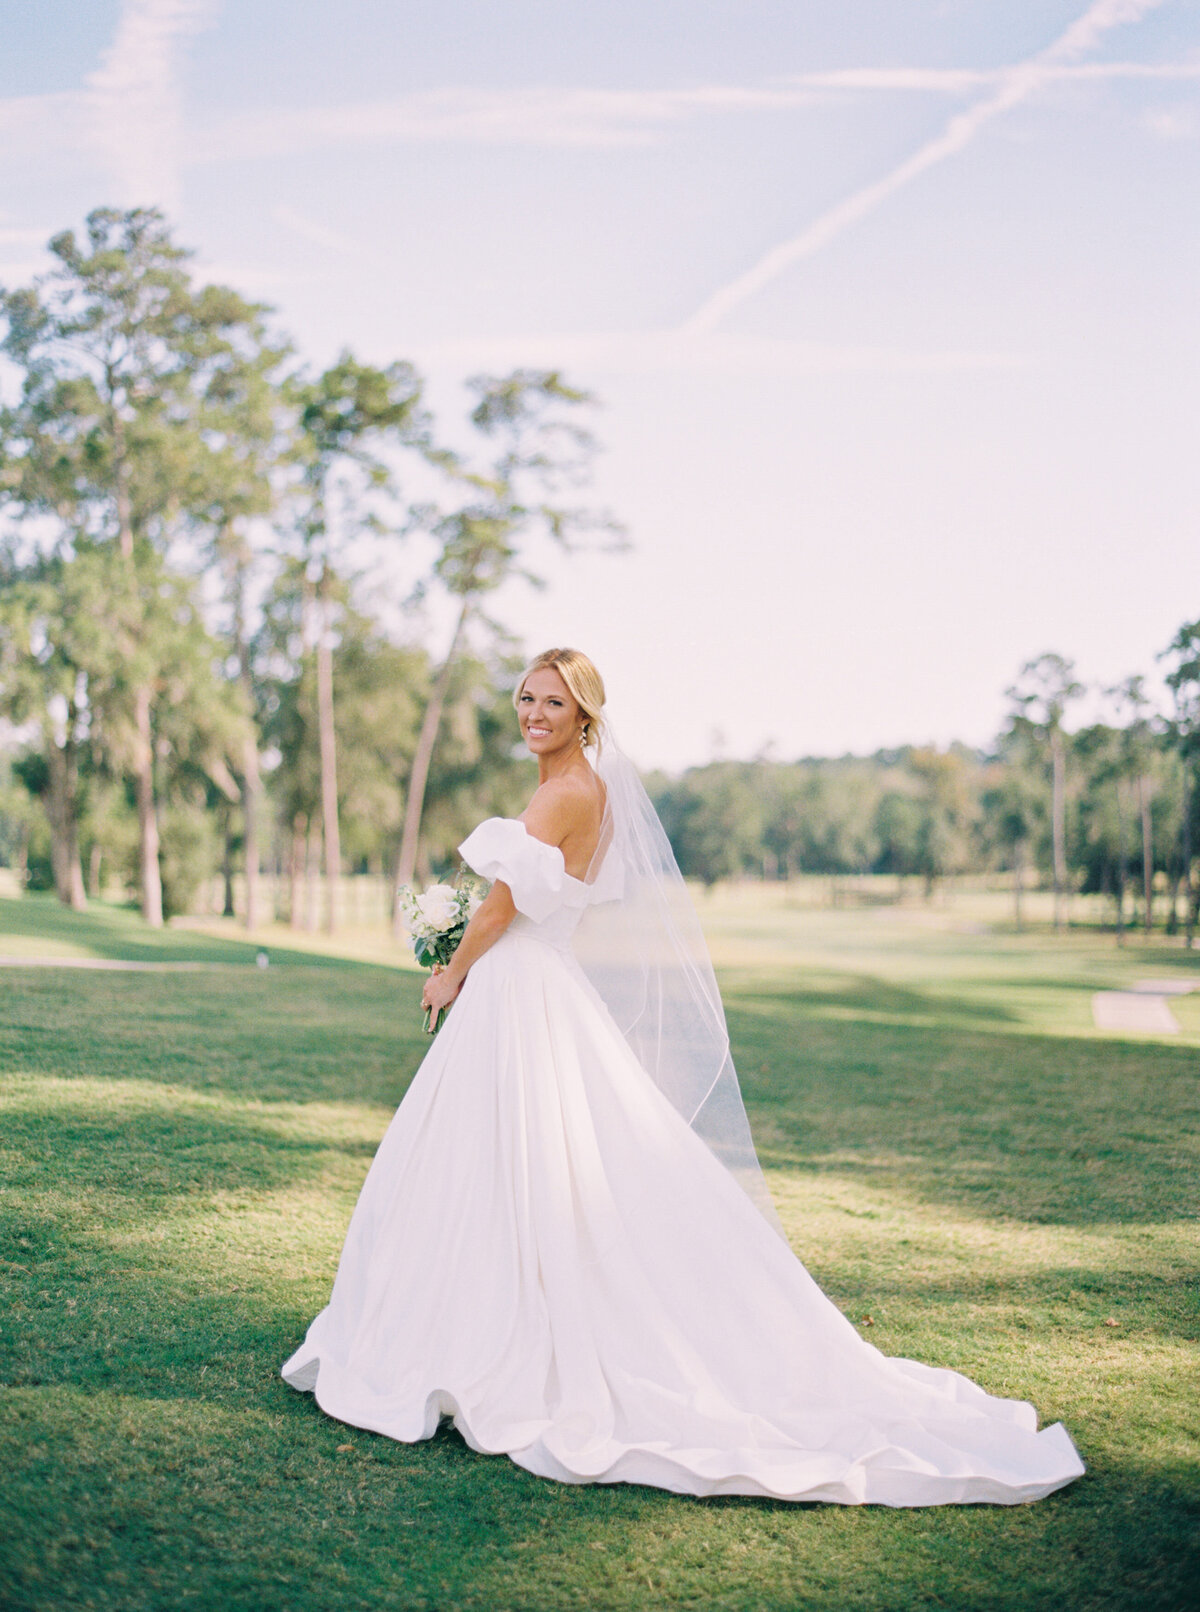 Stunning bridal portrait on a golf course